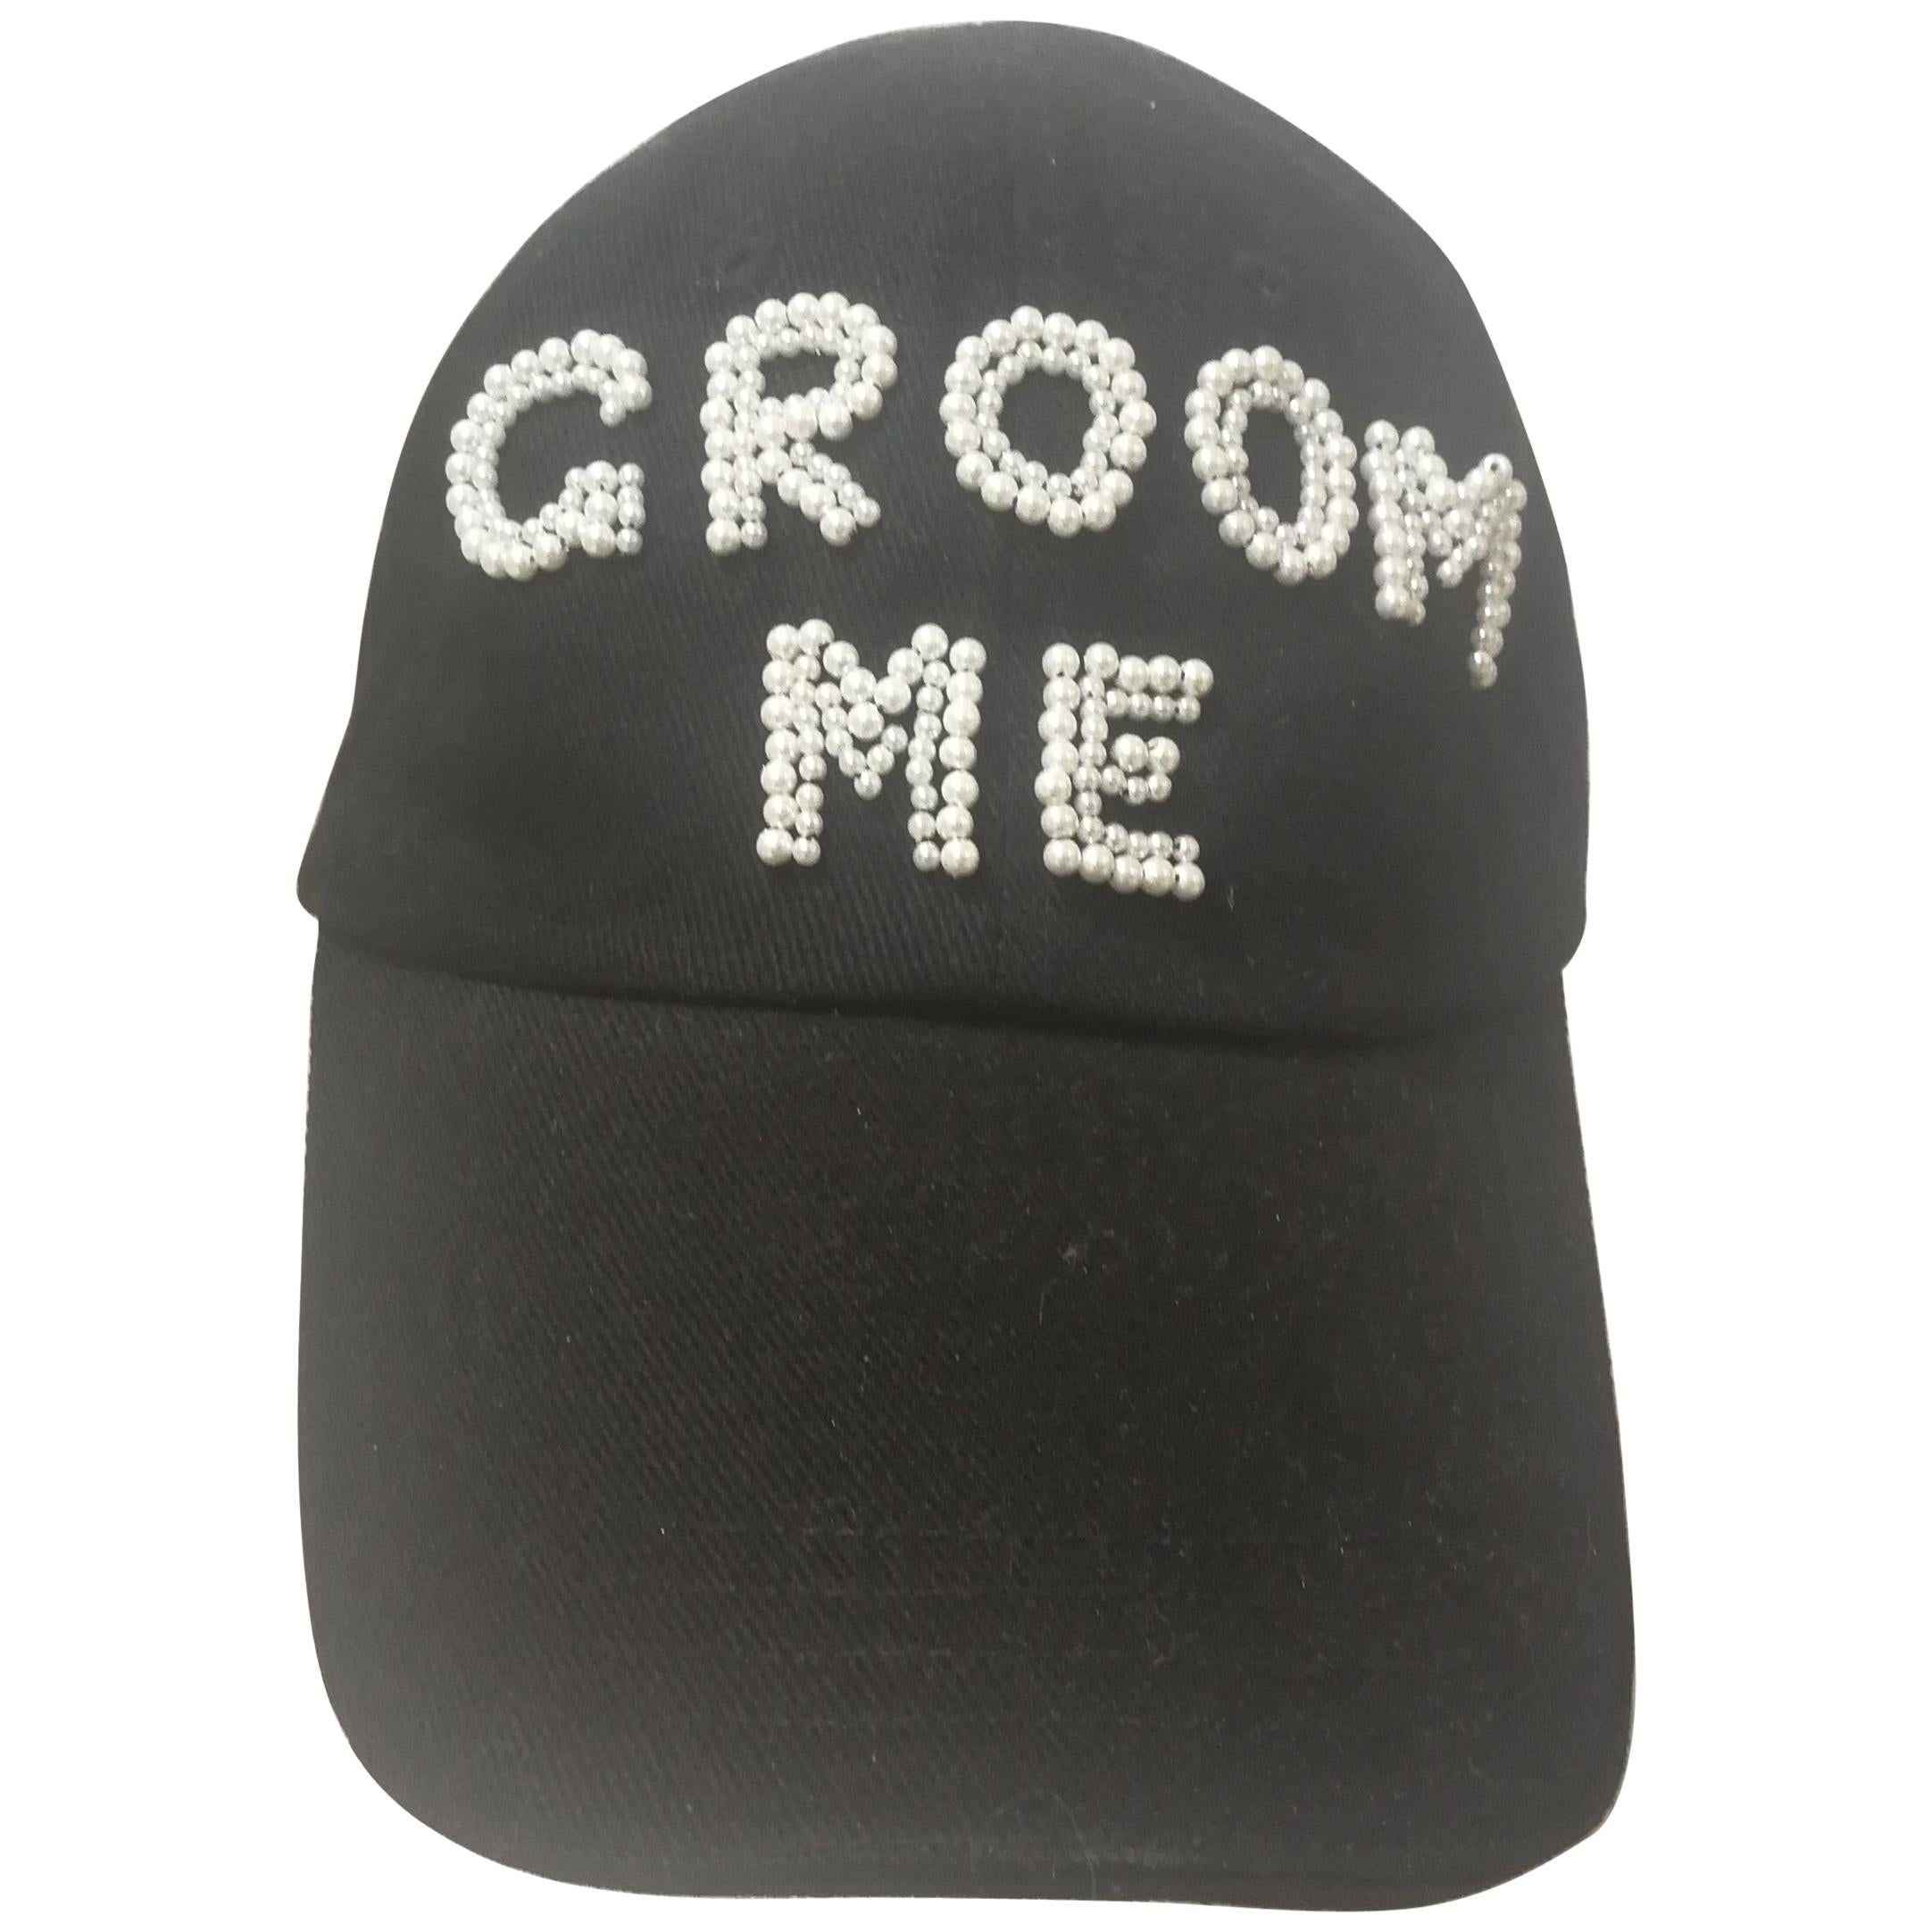 Laurence and Chico Black Groom Me Hat / Cap